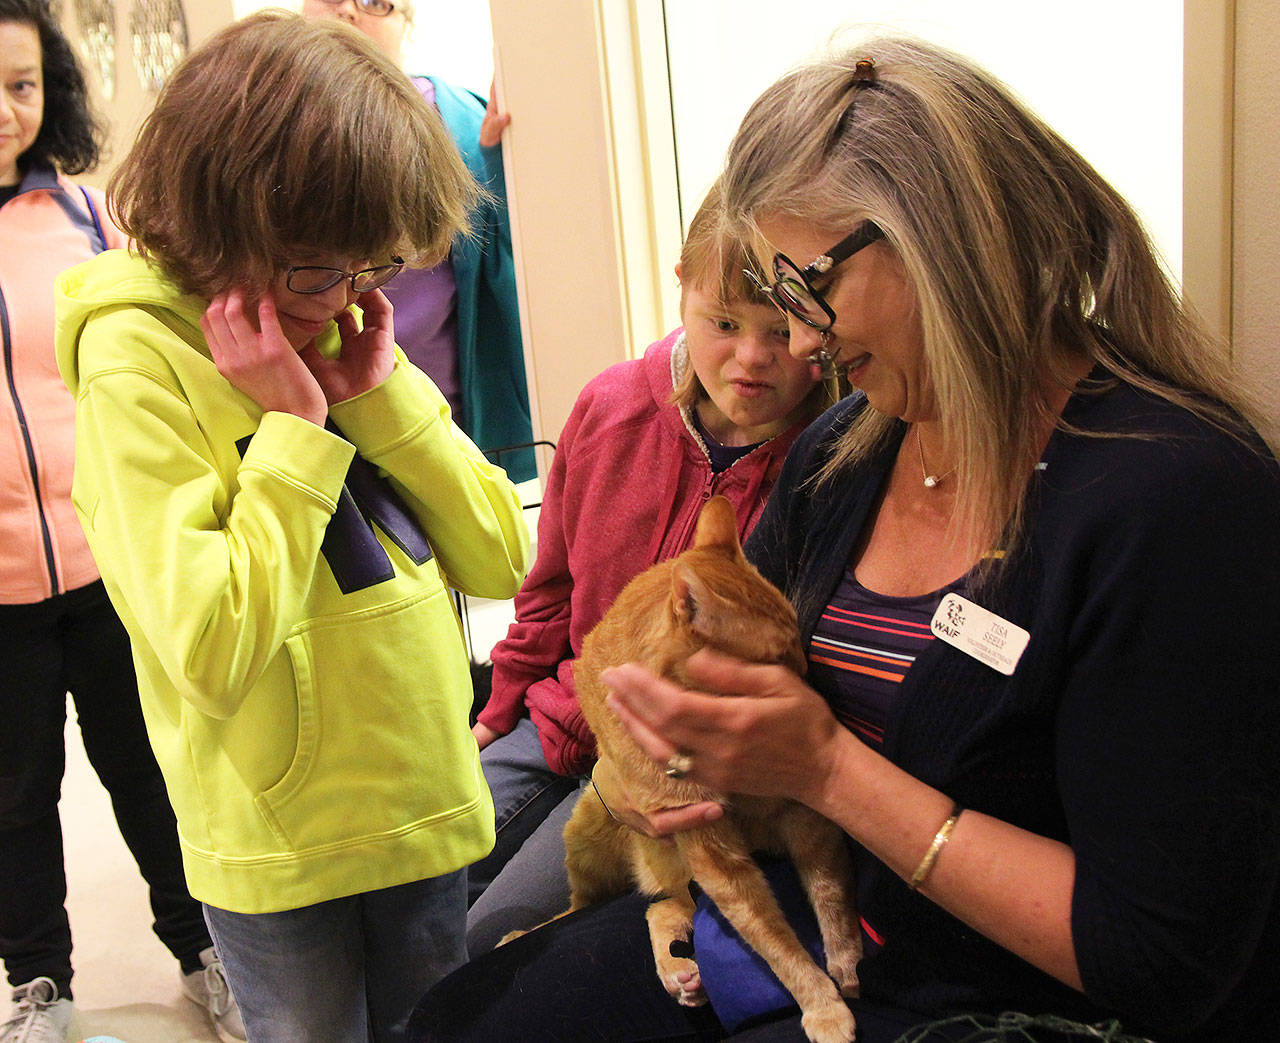 Lydia Vaughan, left, and Courtnee Cox admire one of the cats at WAIF Animal Shelter, held by Tisa Seely, volunteer and outreach coordinator at WAIF. Photo by Laura Guido/Whidbey News Group